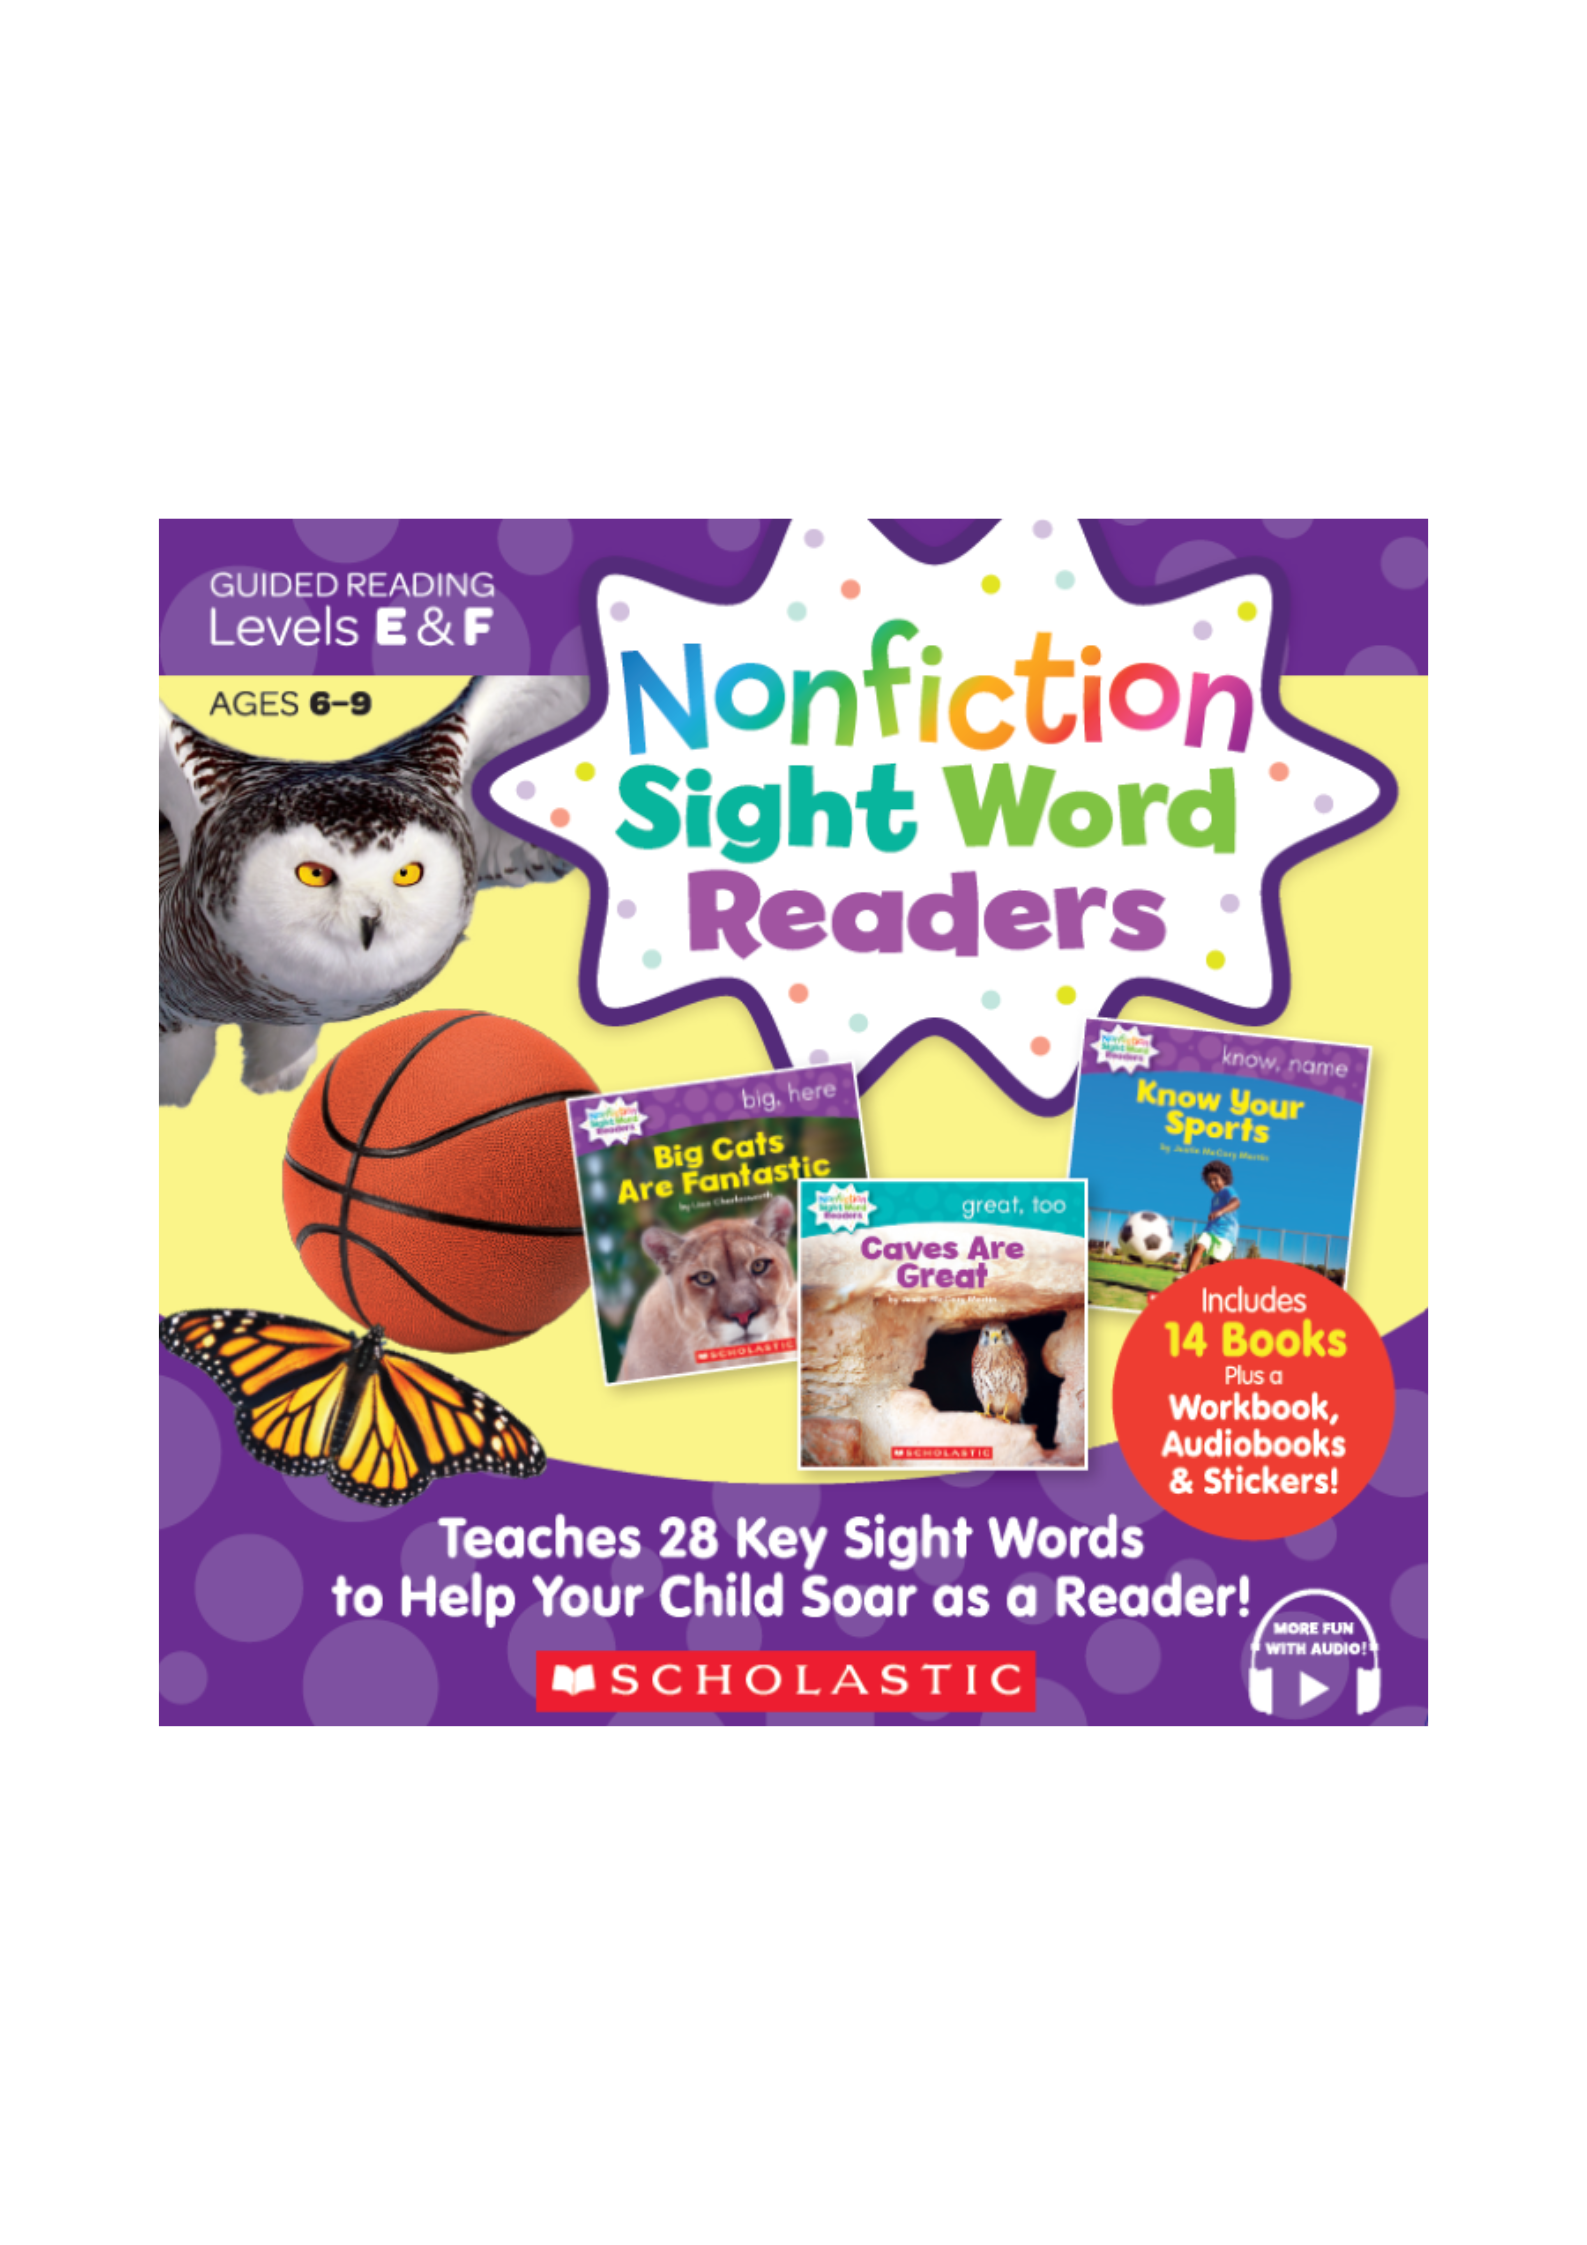 Nonfiction Sight Word Readers Level E & F